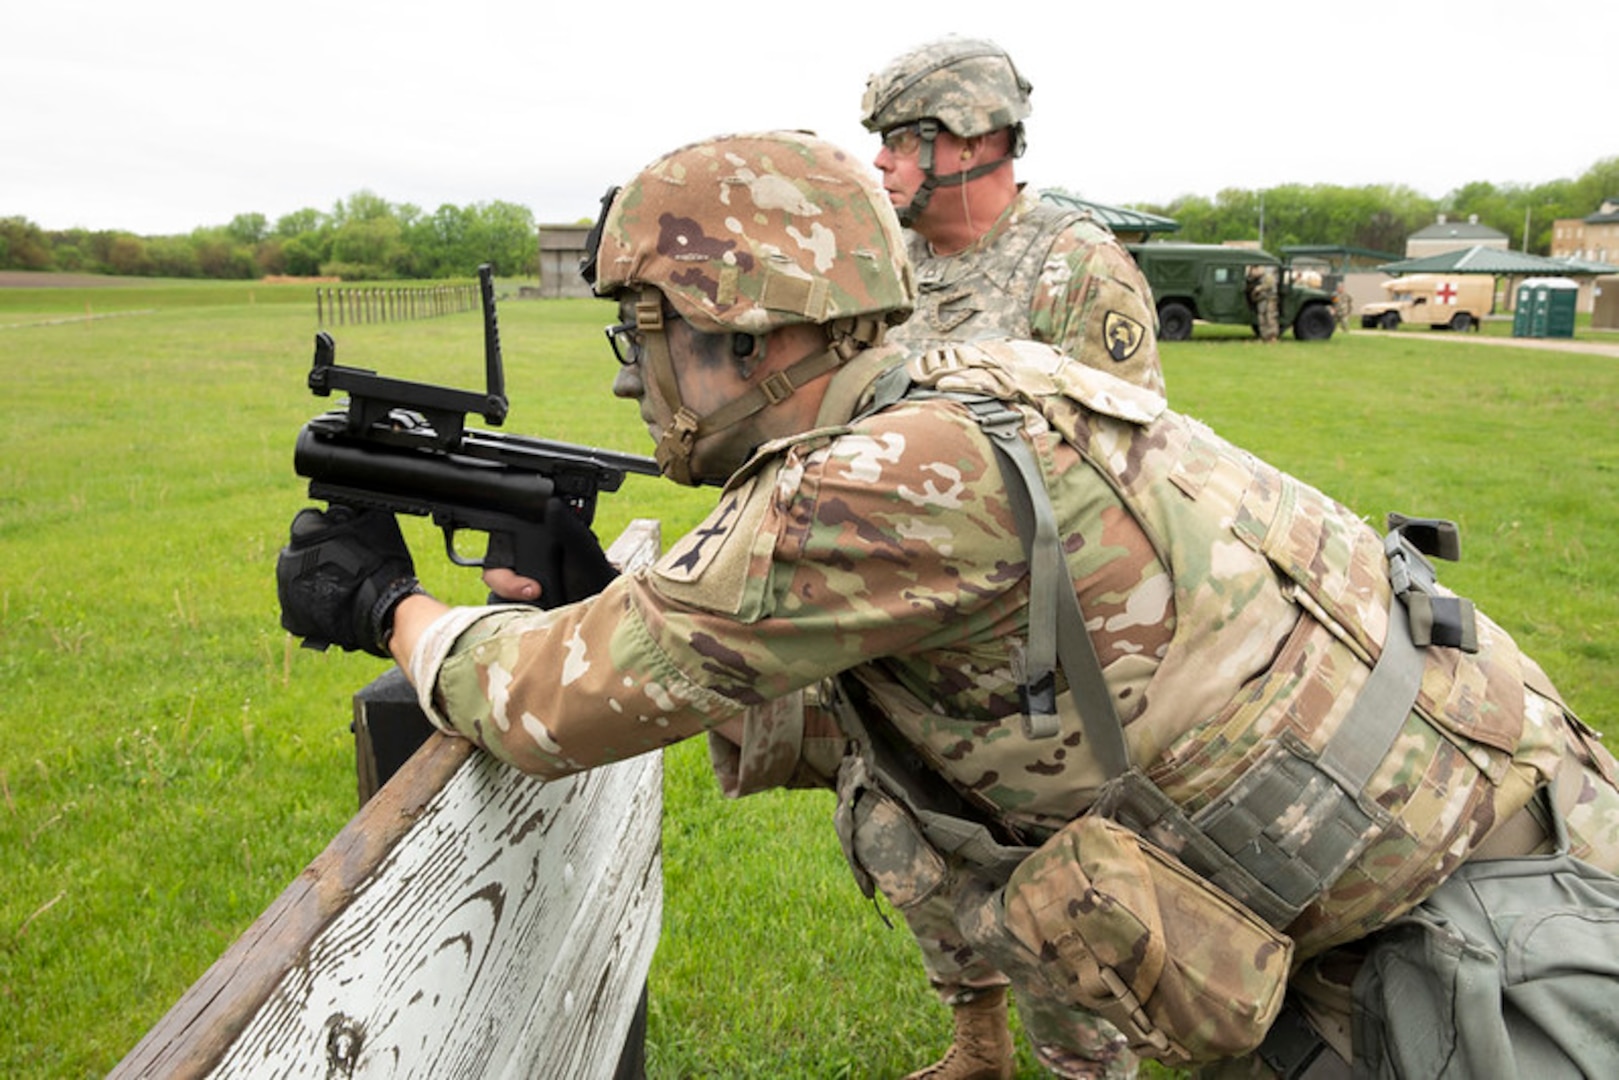 Spc. Tevin Kenton, from the Wisconsin Army National Guard’s Troop C, 1st Squadron, 105th Cavalry Regiment, fires an M-320 grenade launcher May 3 during the 2024 Region IV Best Warrior Competition at Camp Dodge, Iowa. Kenton took first place in the lower enlisted division and will represent Wisconsin at the national Best Warrior Competition this August in Vermont. 135th Mobile Public Affairs Detachment photo